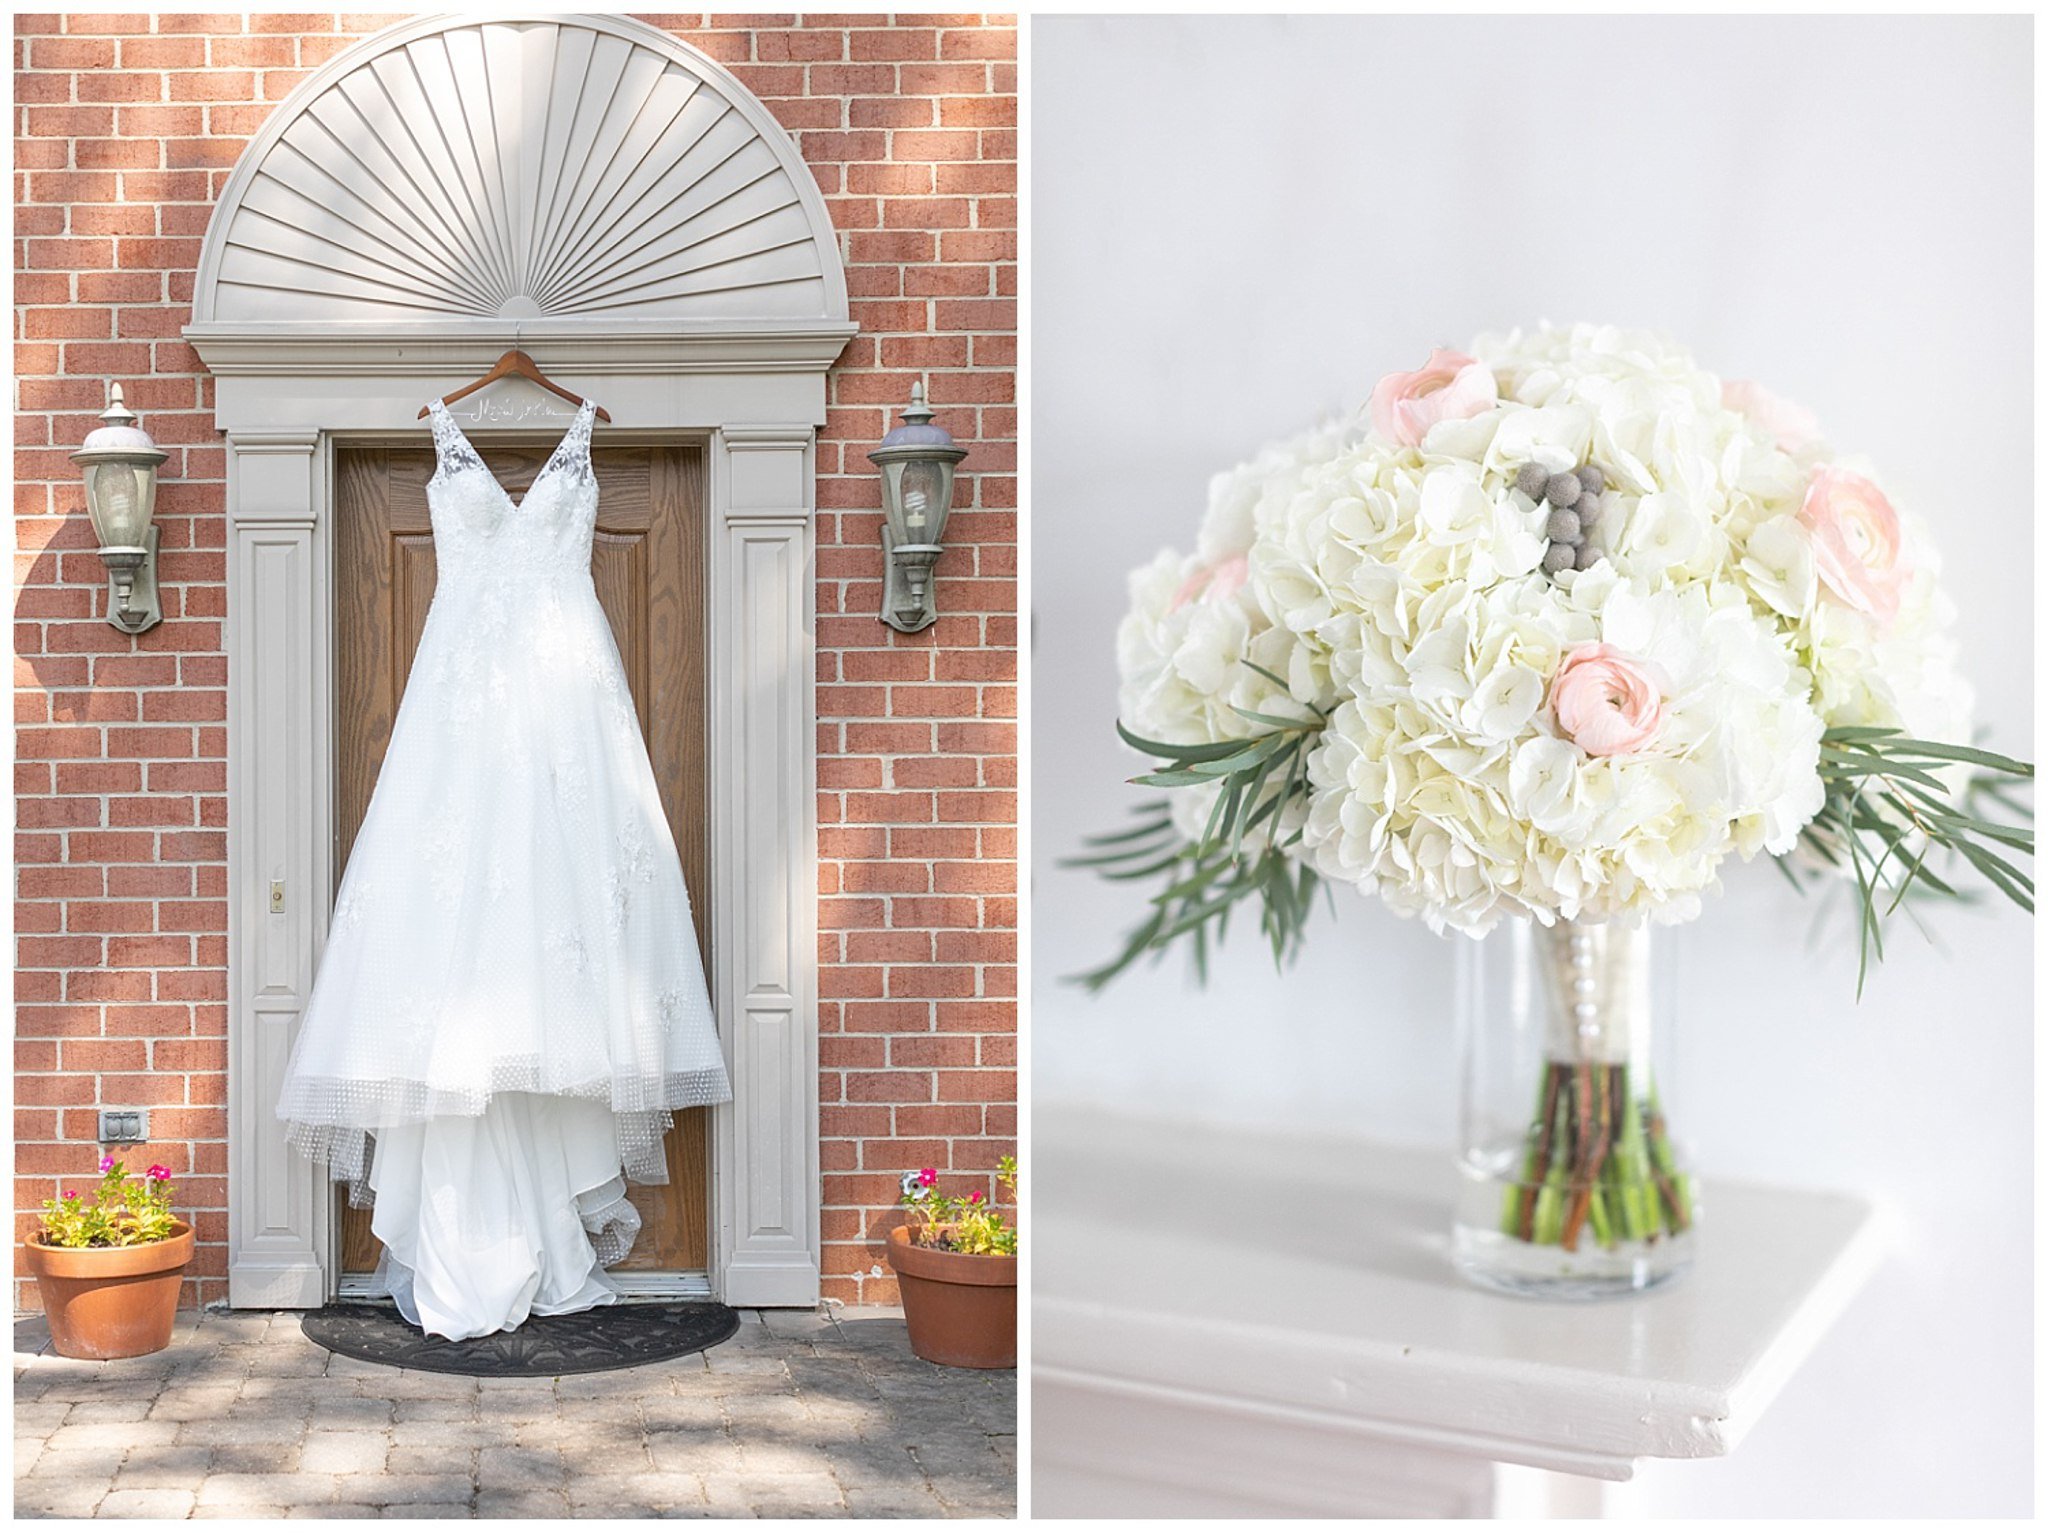 say yes to the perfect dress top 5 wedding tips, Say YES To The DRESS!! Top 5 Tips on Picking the PERFECT Wedding Dress, Fine Art Wedding Photographer Baltimore MD